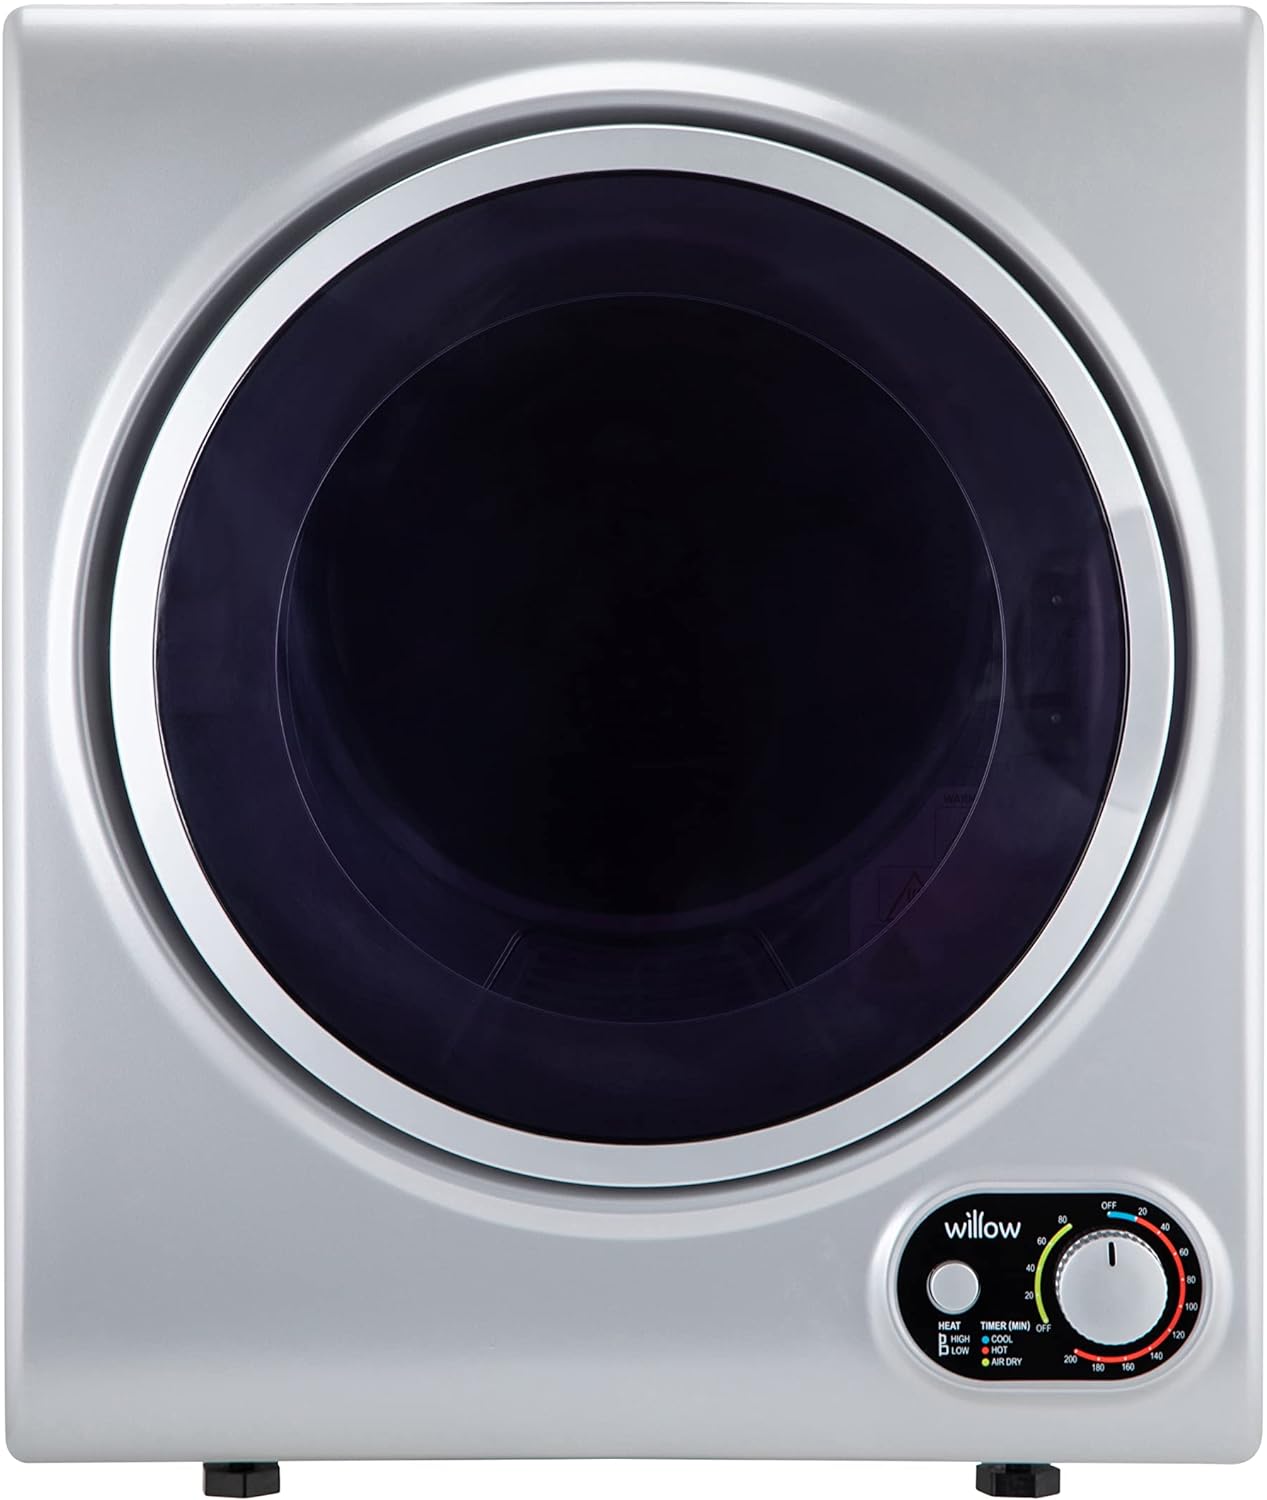 Willow WTD25 2.5kg Freestanding Vented Tumble Dryer Compact and Portable, 3 Temperature Settings, Crease Guard, and 2 Years Warranty for peace of mind (White) - Amazing Gadgets Outlet